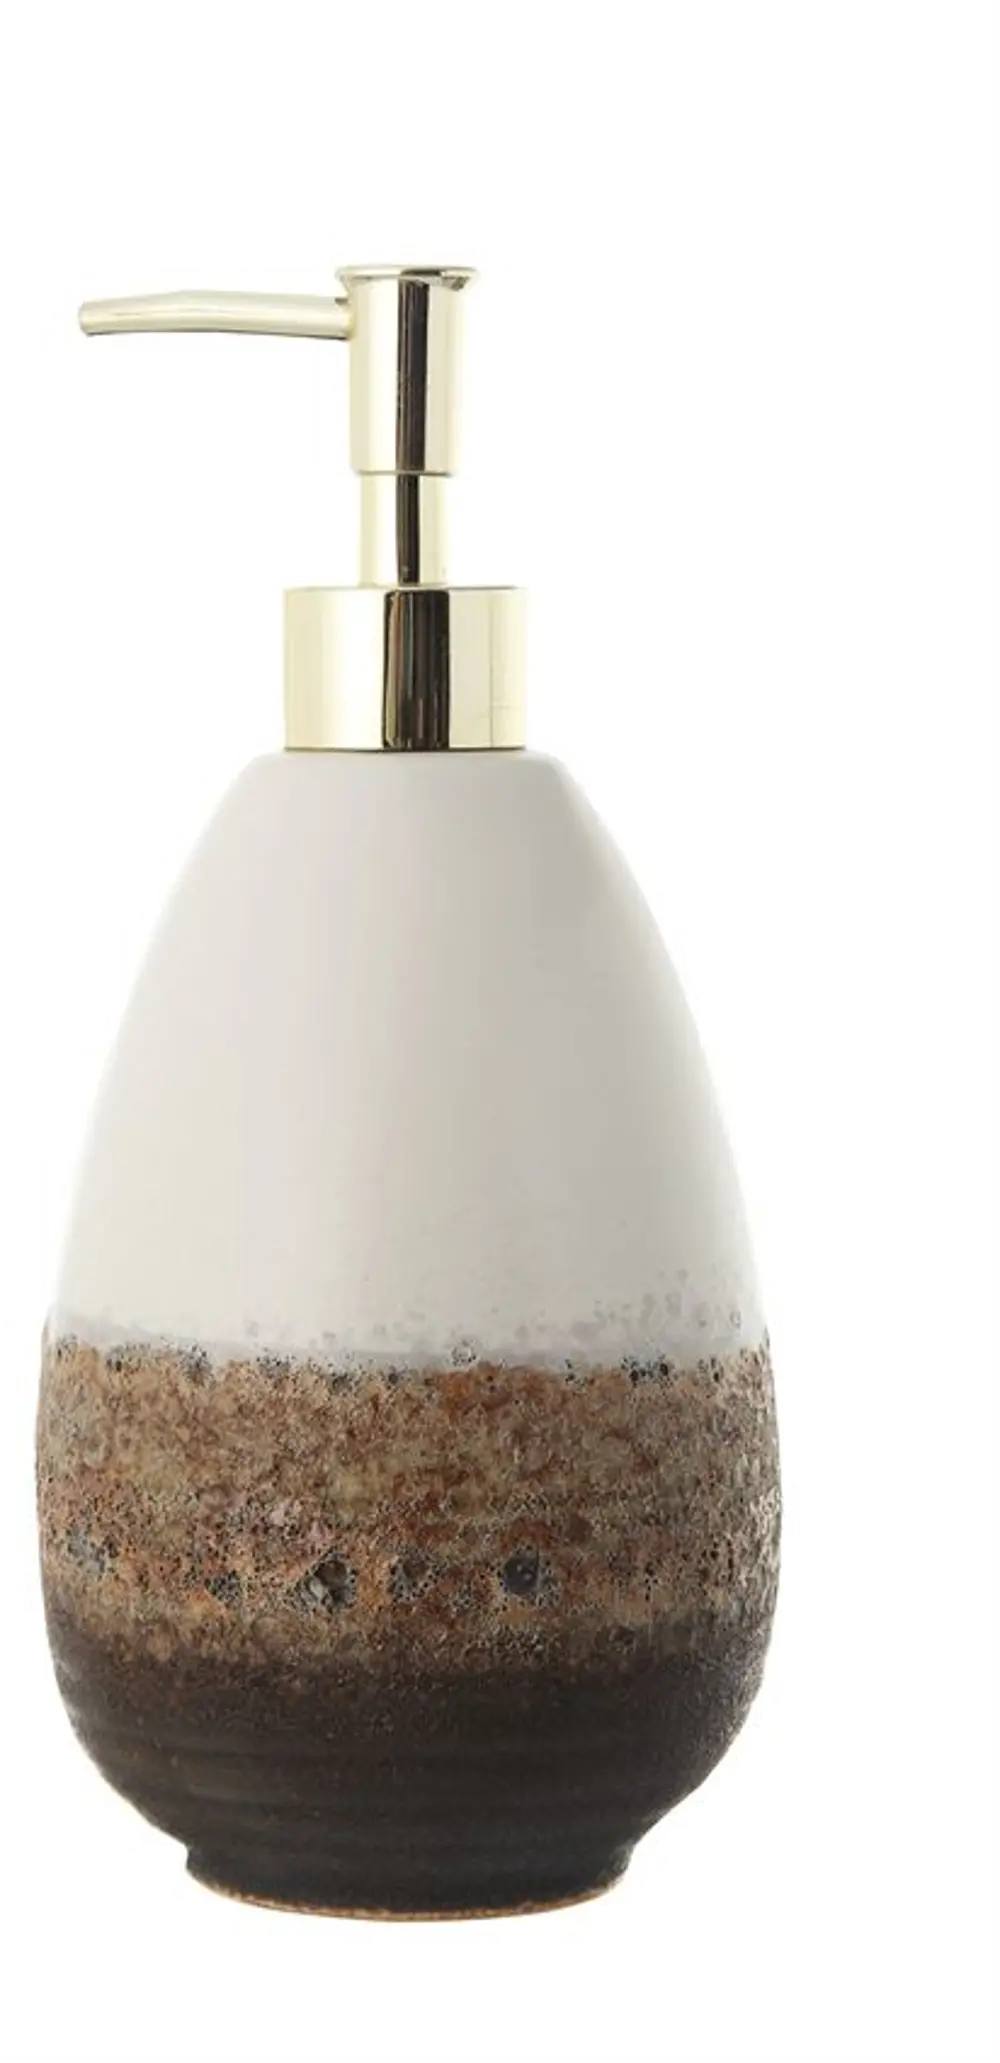 AH0576/SOAPDISPENSER Cream and Brown Ombre Soap Dispenser with Gold Colored Pump-1